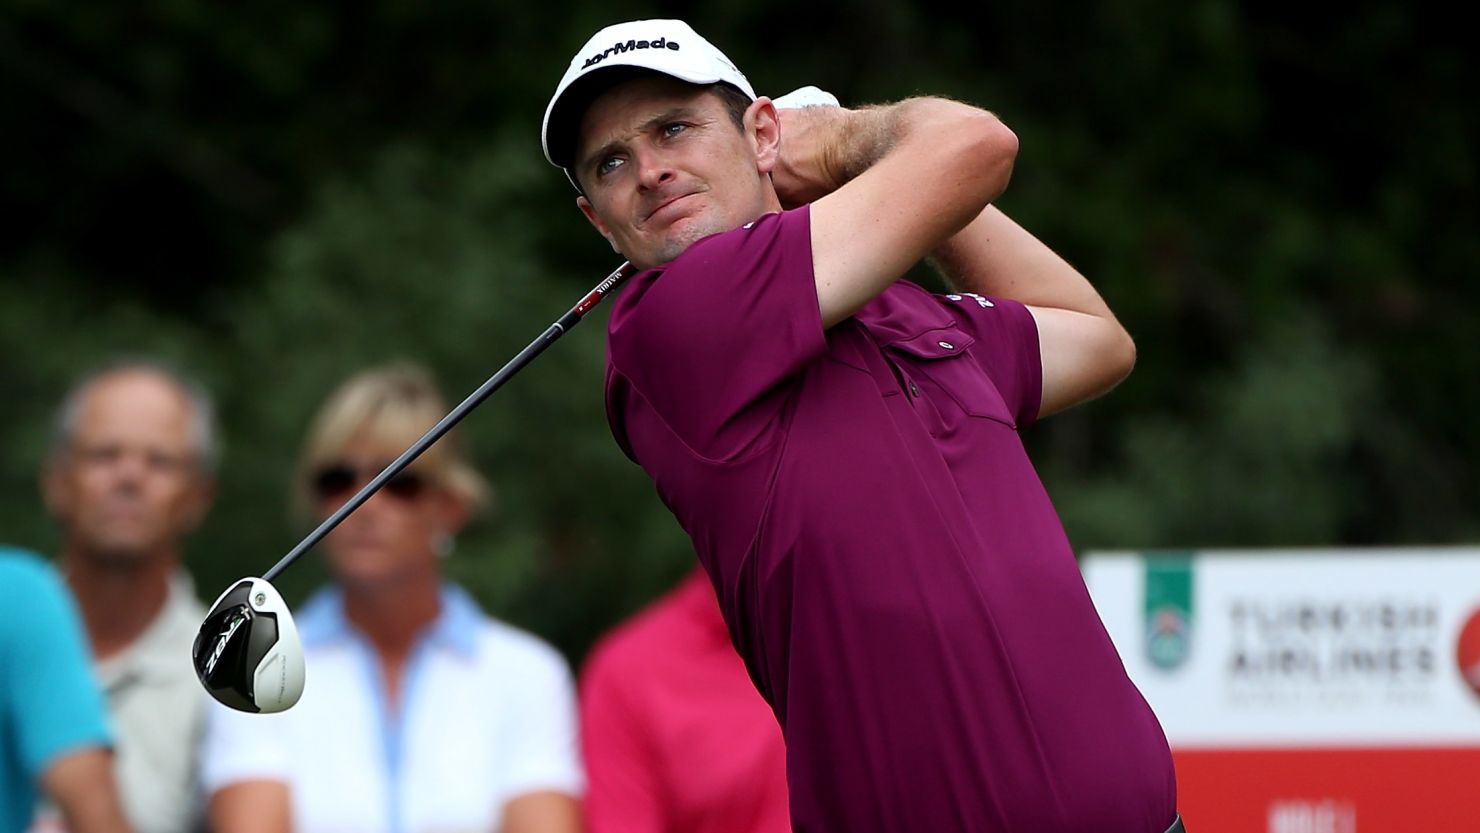 Justin Rose defeated Phil Mickelson on the final day of the Ryder Cup as Europe retained the trophy.